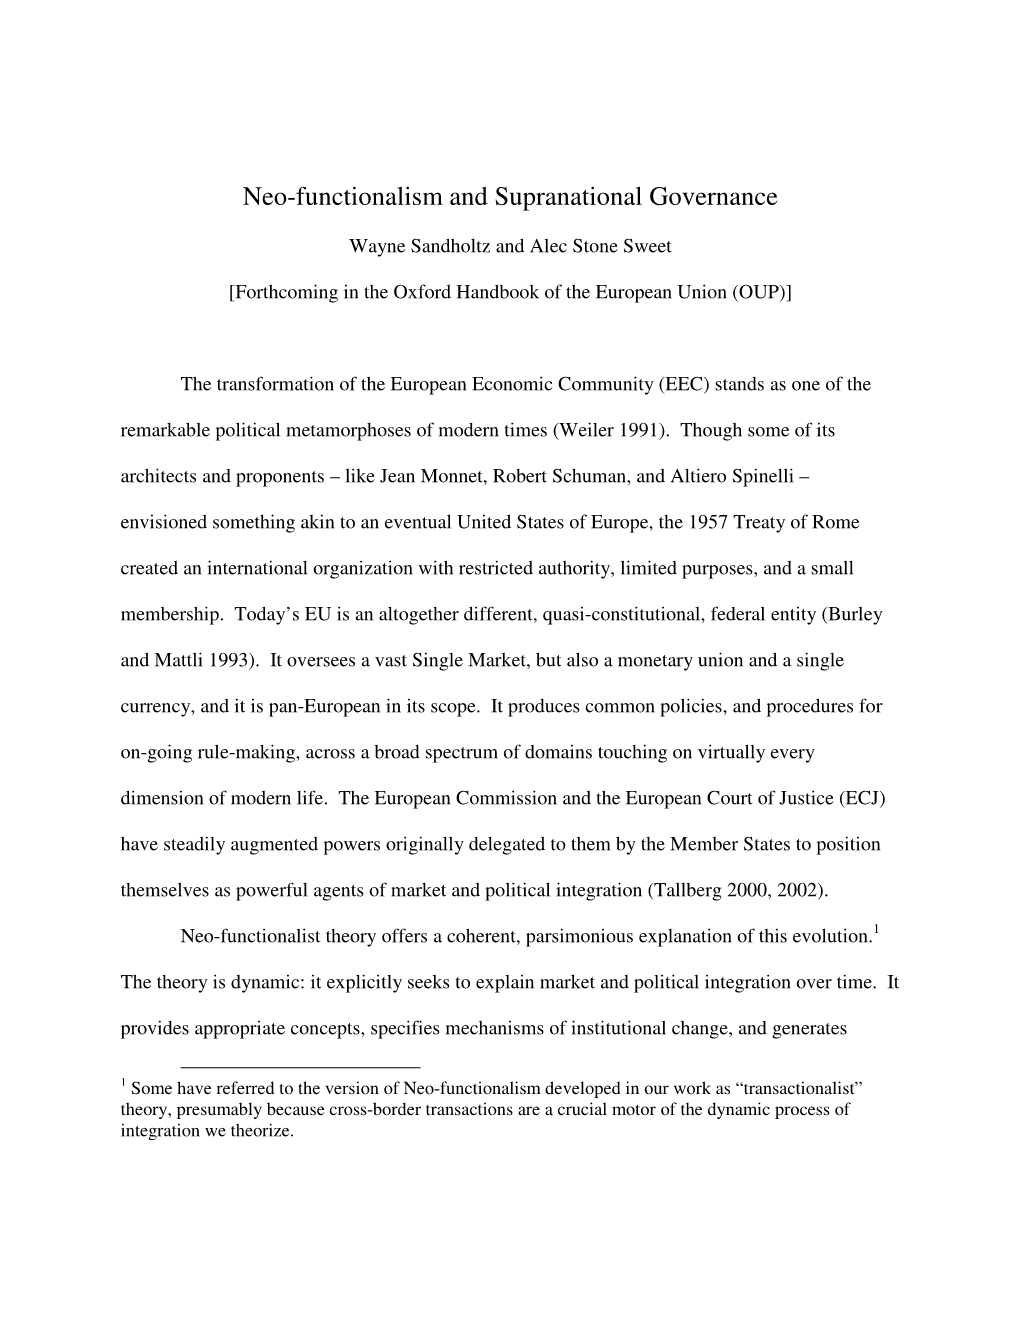 Neo-Functionalism and Supranational Governance, In